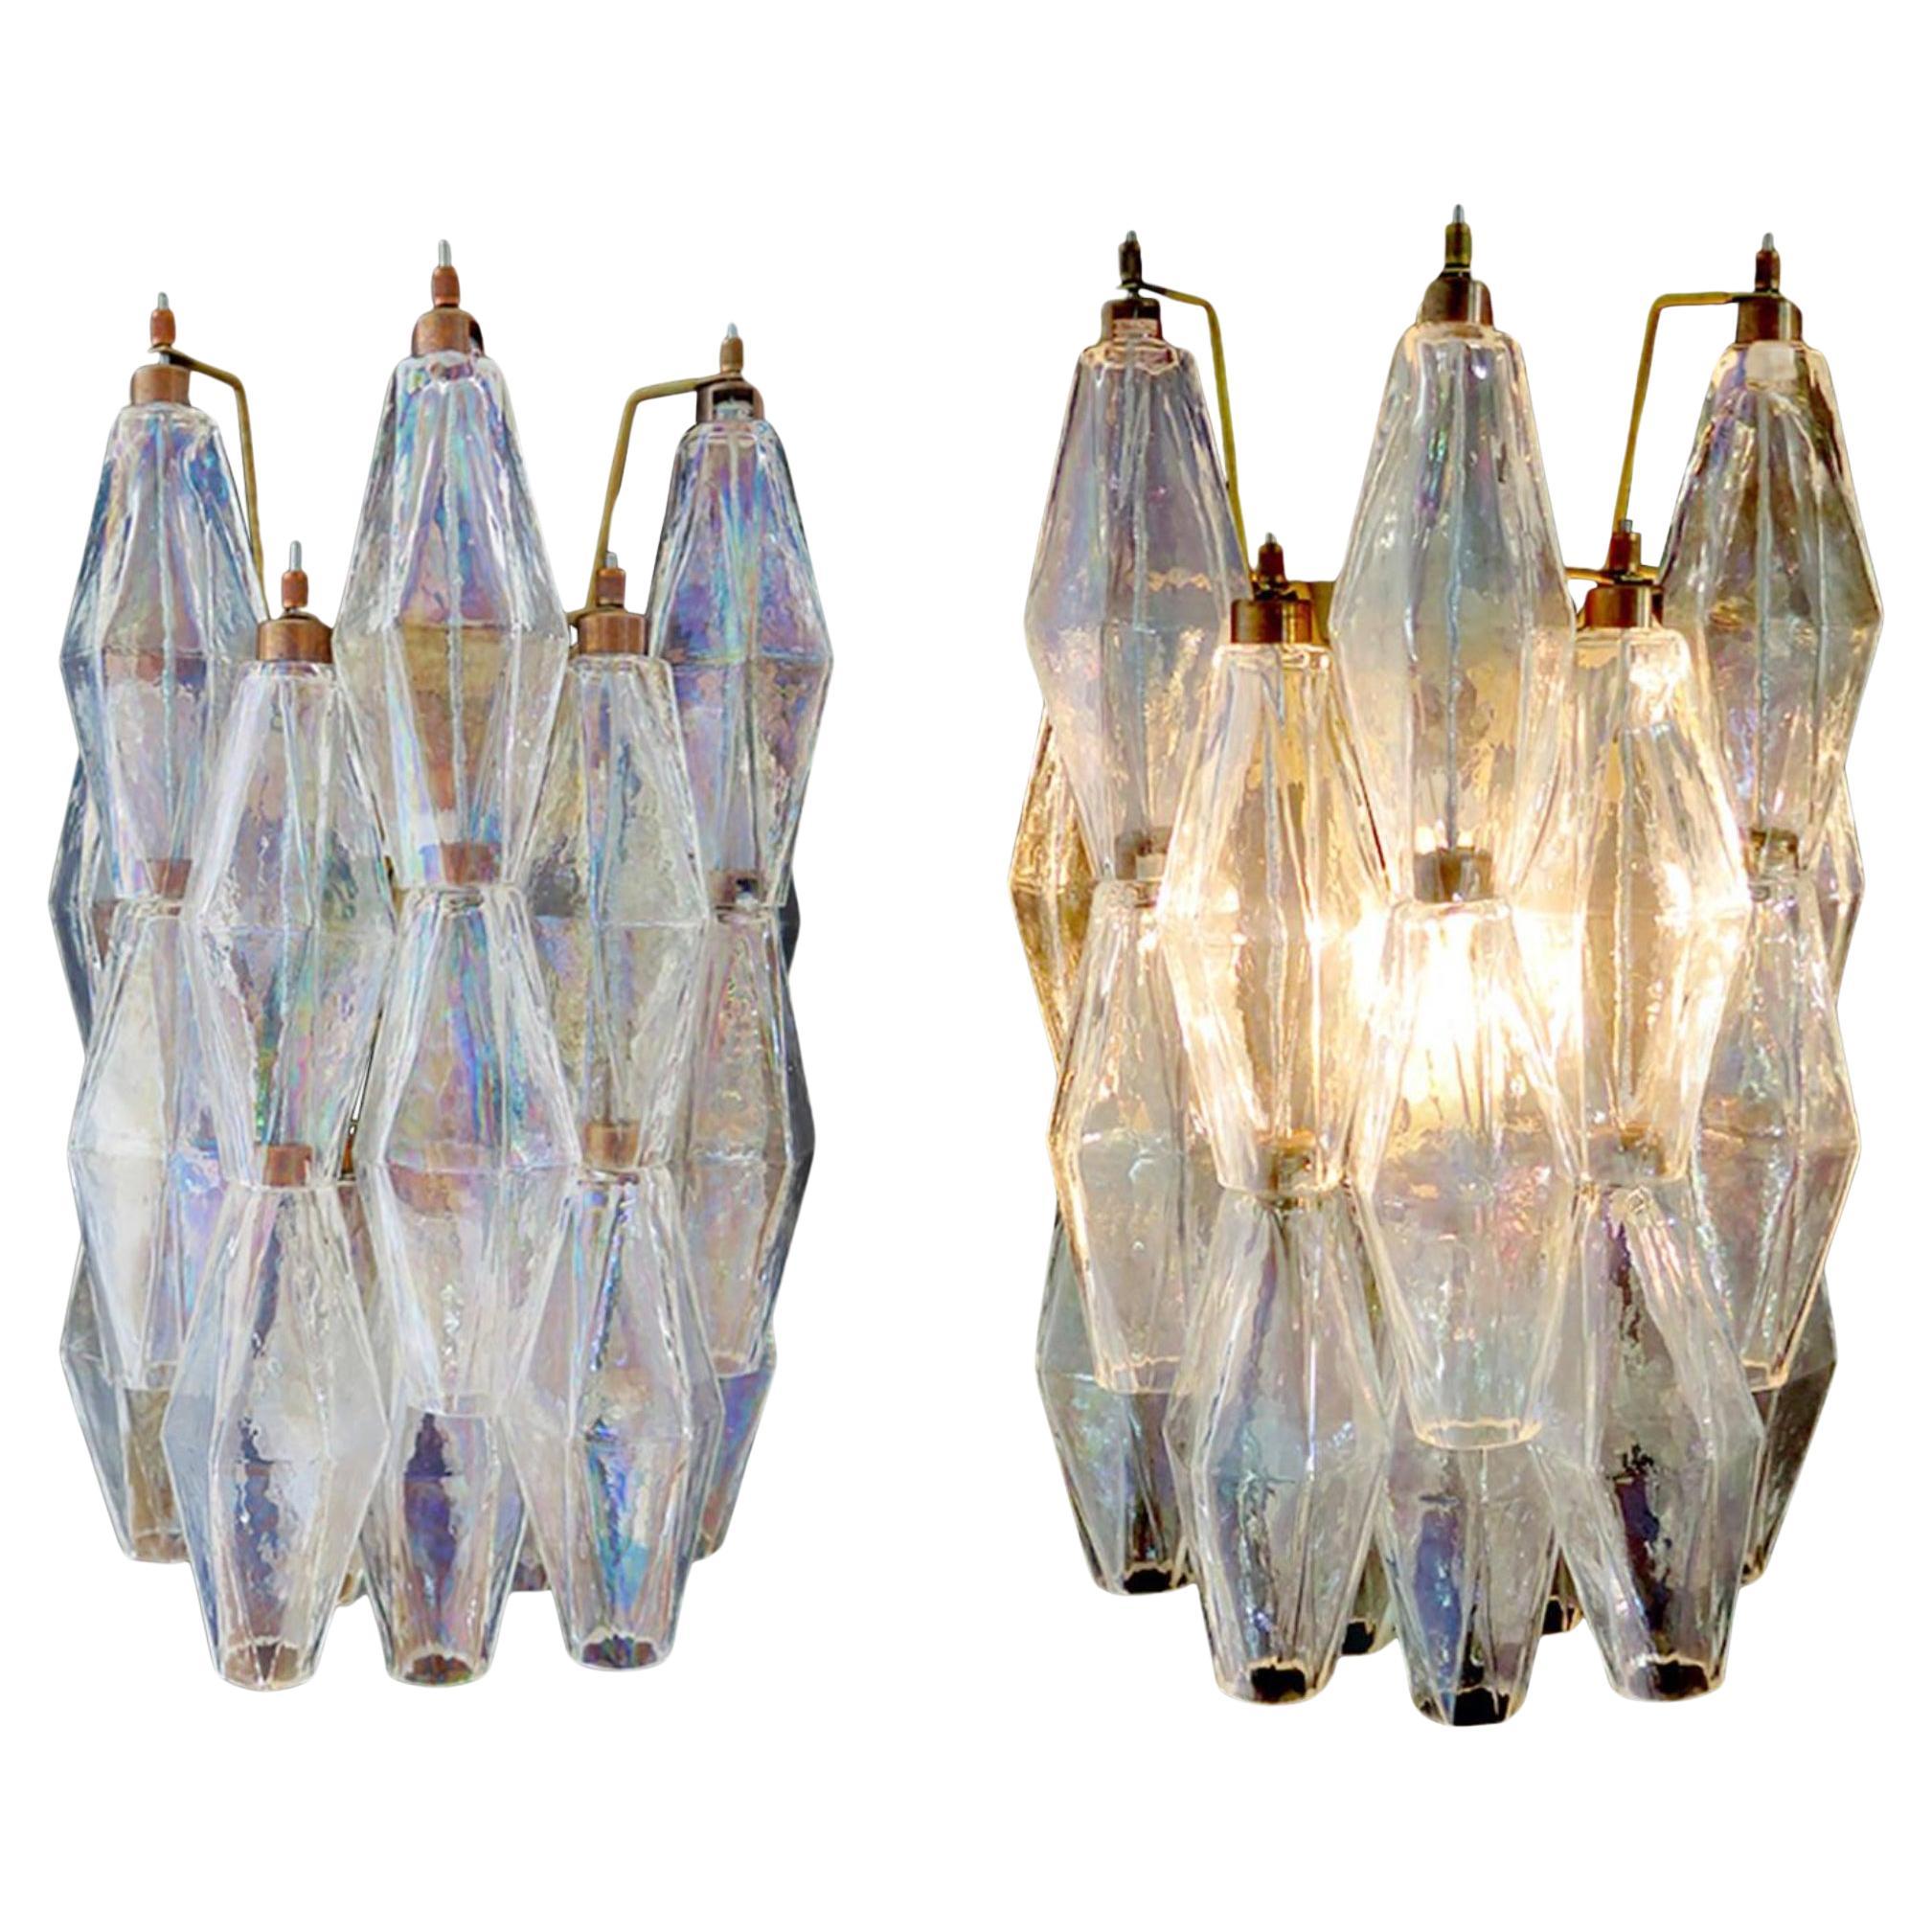 100% handmade in Murano. The sconces are made by 16 Murano handmade Poliedri glass, for each one, in a solid metal frame gold painted and brass. The glasses
are now unavailable, they have the particularity of reflecting a multiplicity of colors,